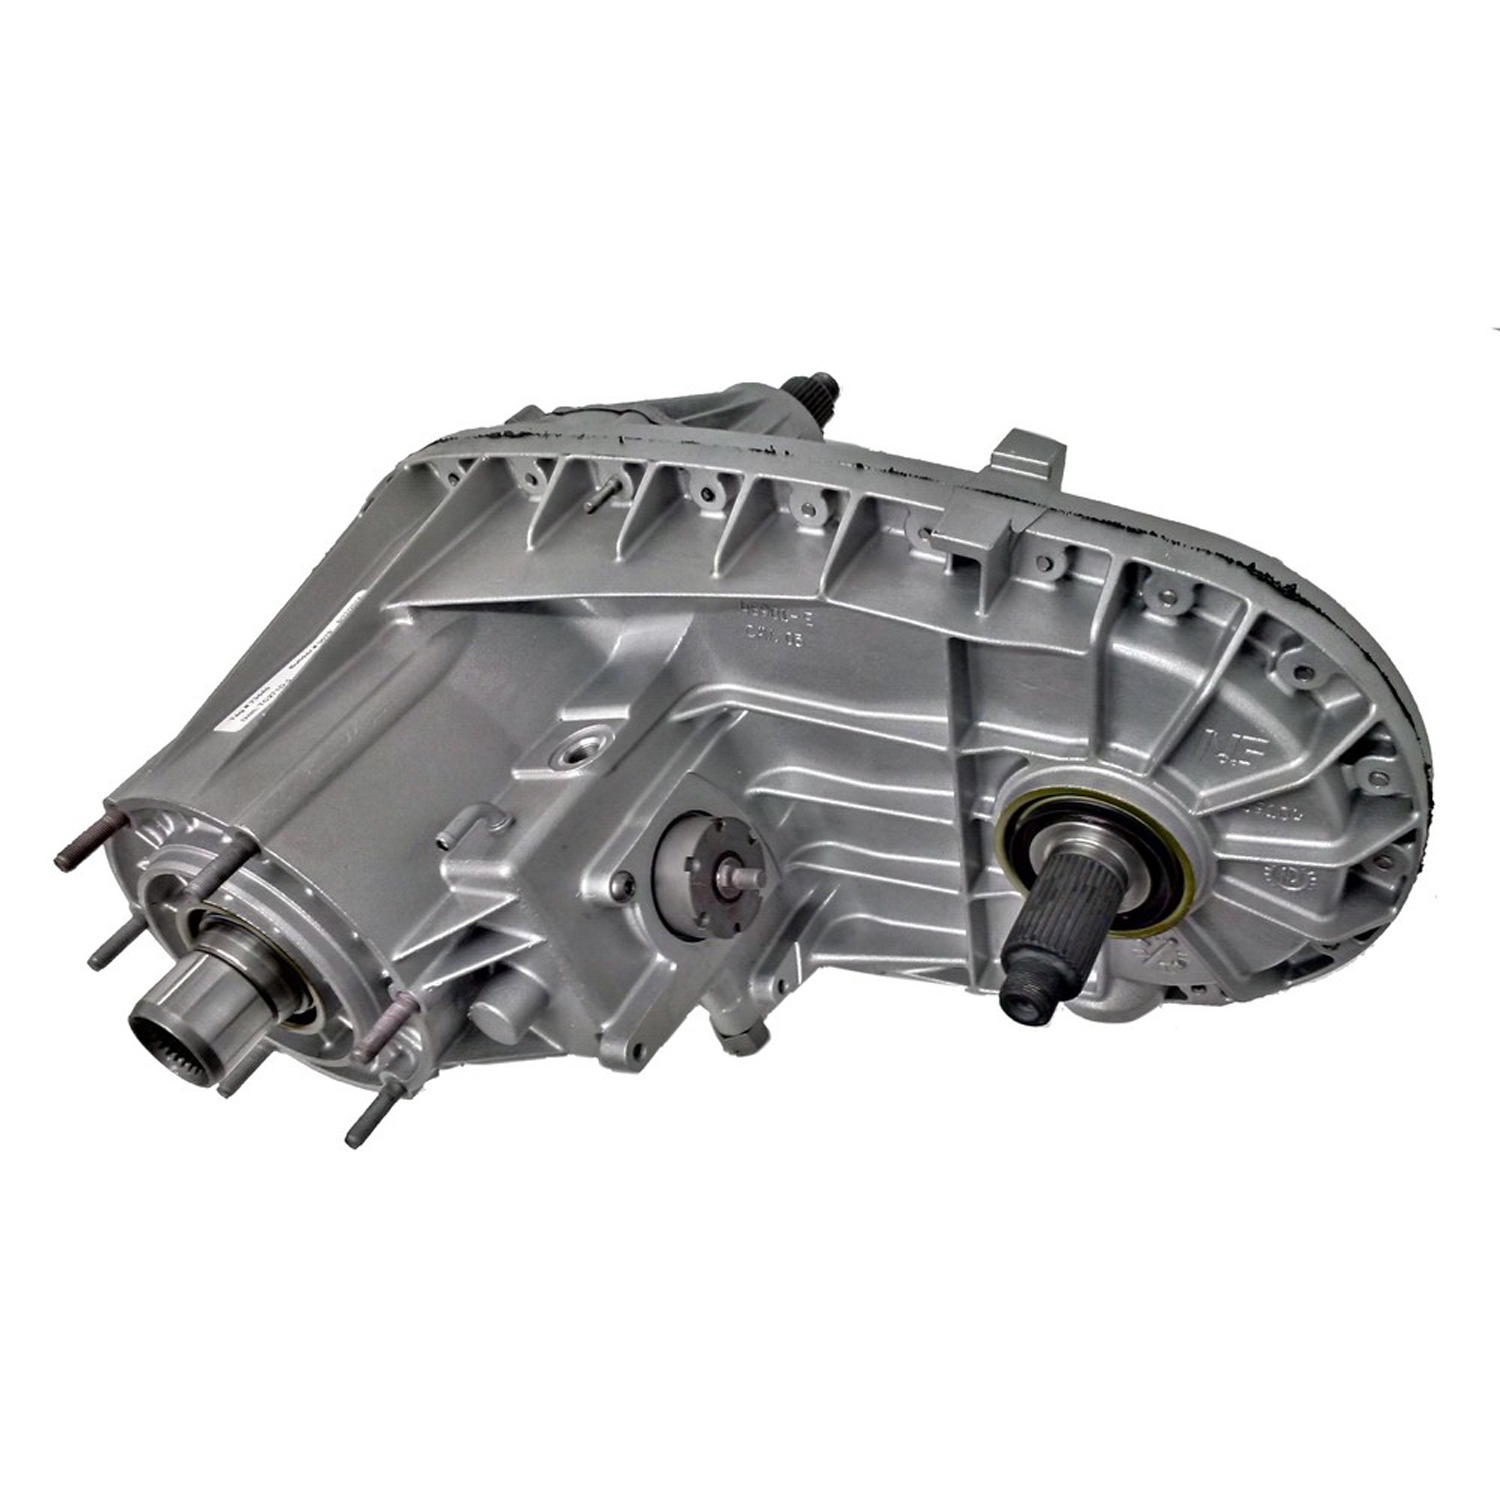 NP271 Transfer Case for Ford 07-10 F-series